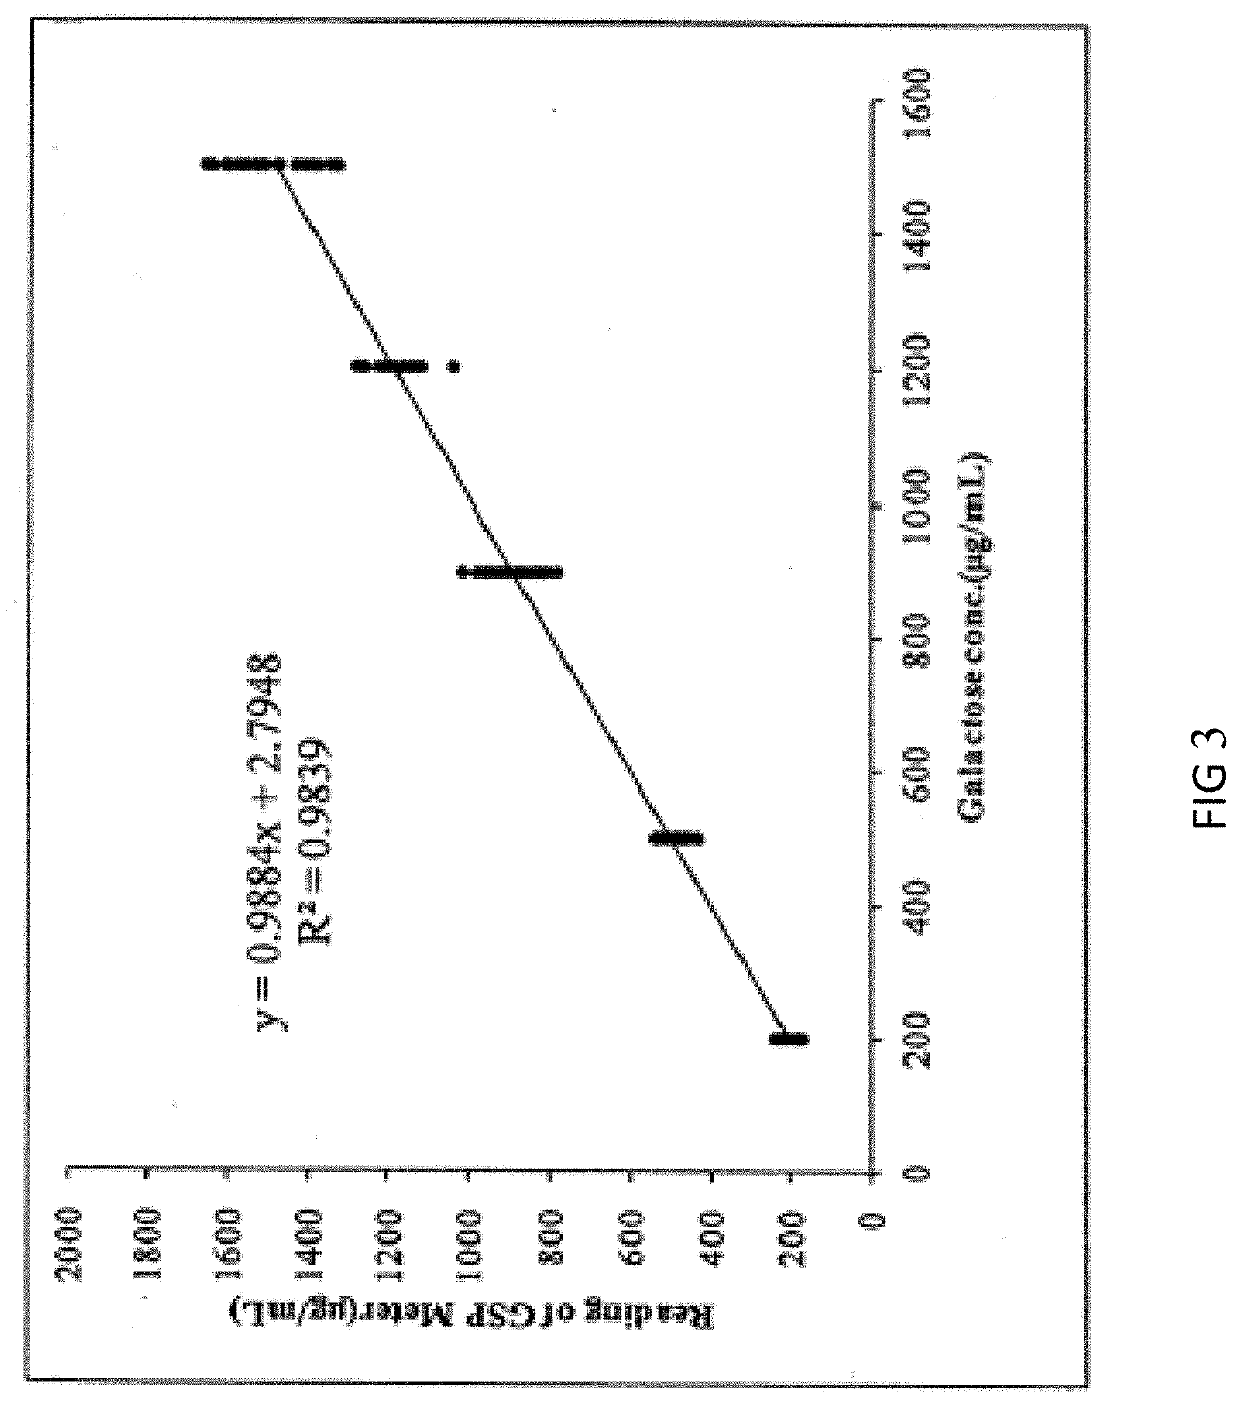 Galactose rapid quantitative detection system and use thereof